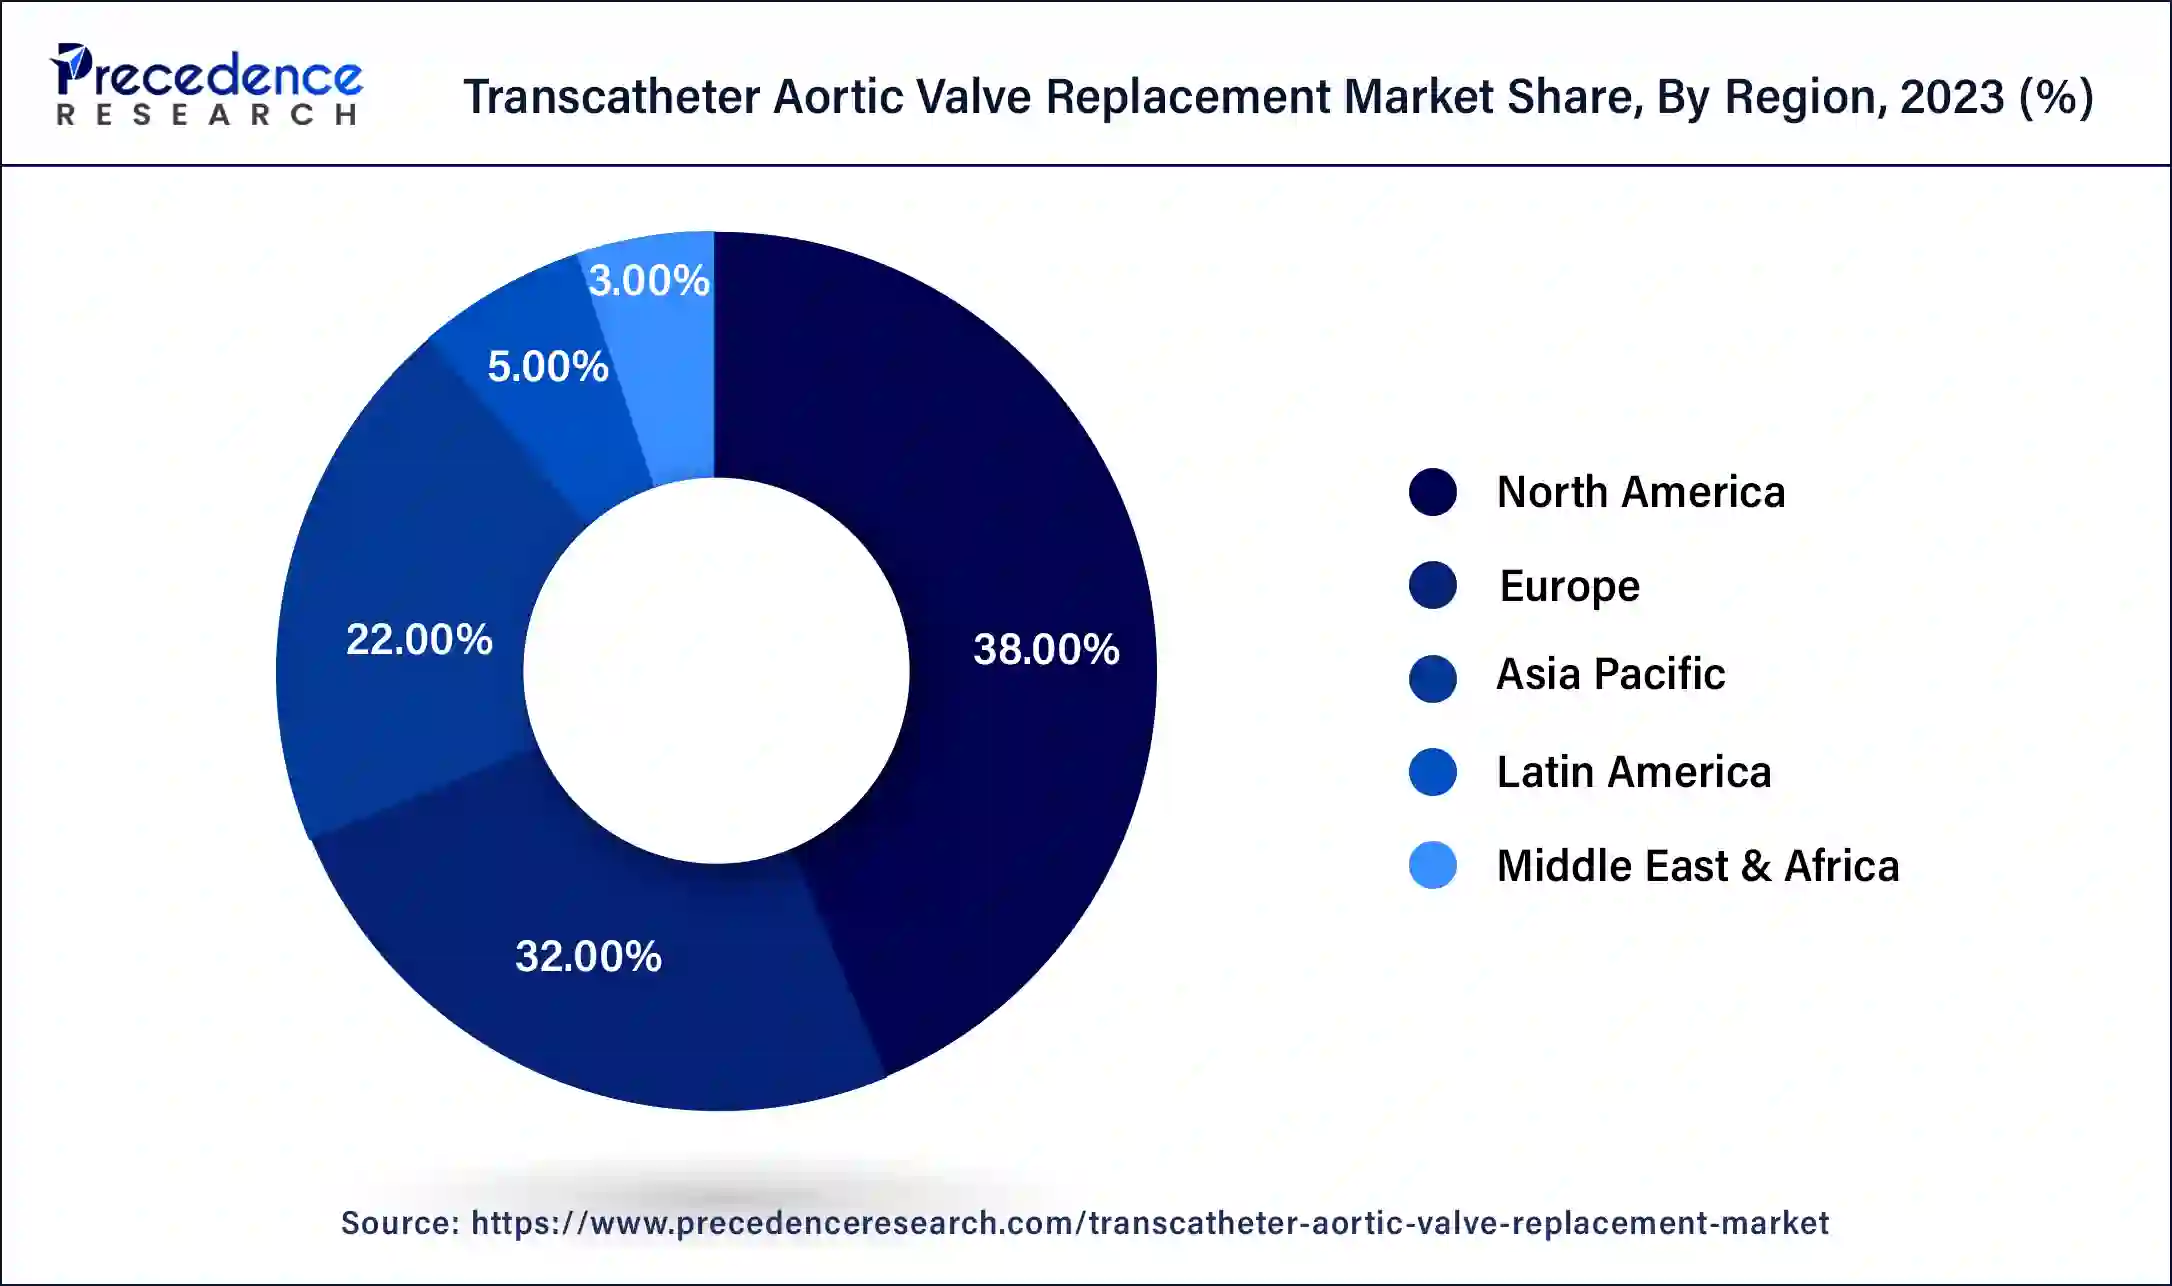 Transcatheter Aortic Valve Replacement Market Share, By Region, 2023 (%)